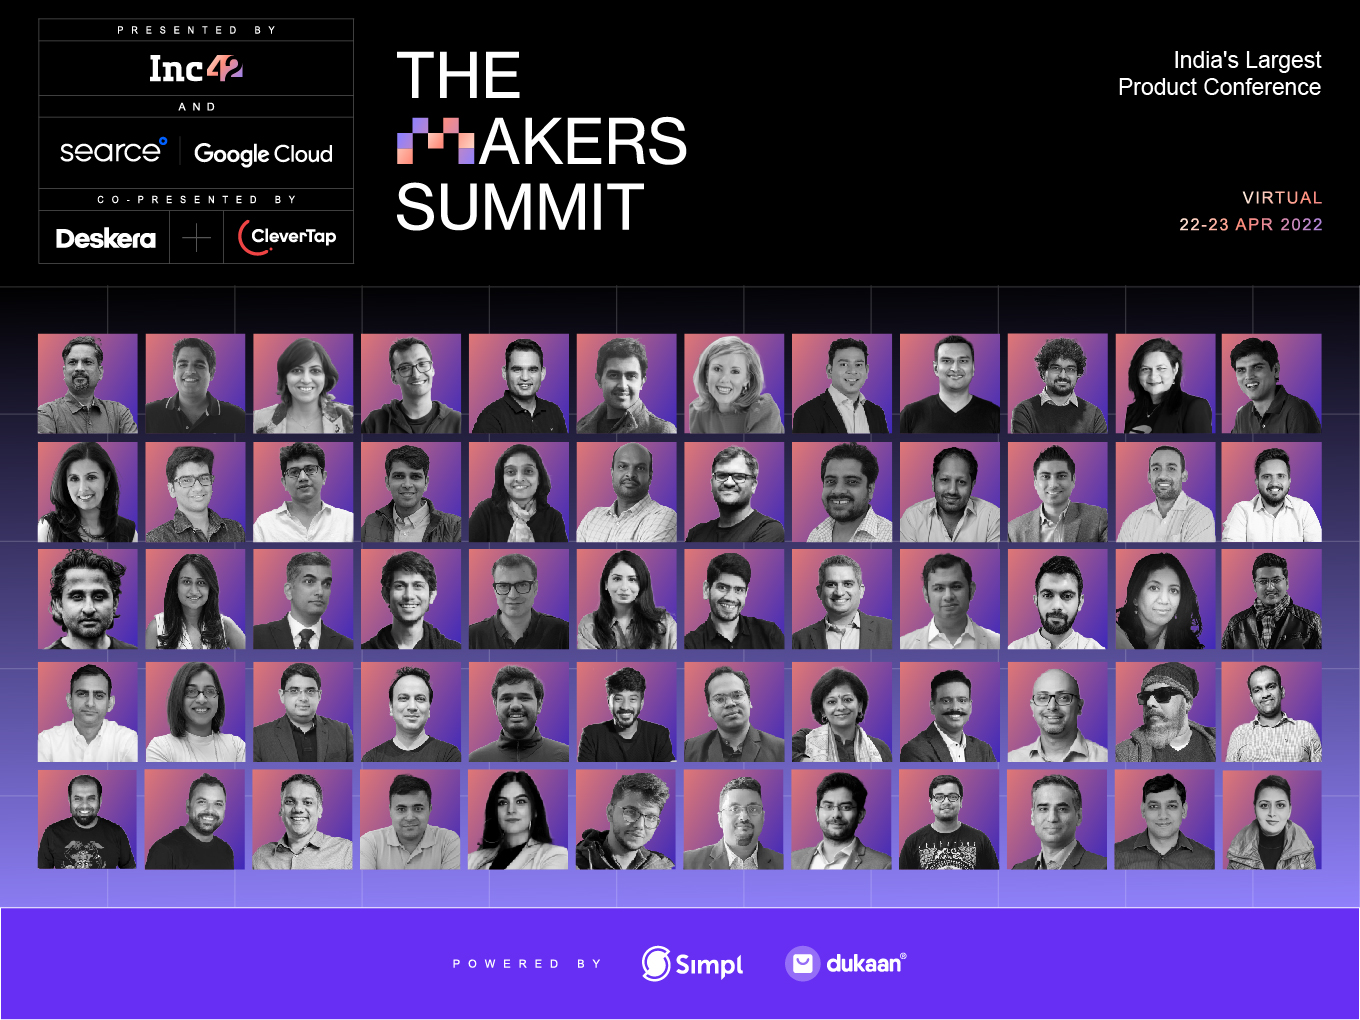 Announcing The Makers Summit 2022 Lineup: Sridhar Vembu, Gaurav Munjal, Rajoshi Ghosh & 60+ Product Leaders Under One Roof